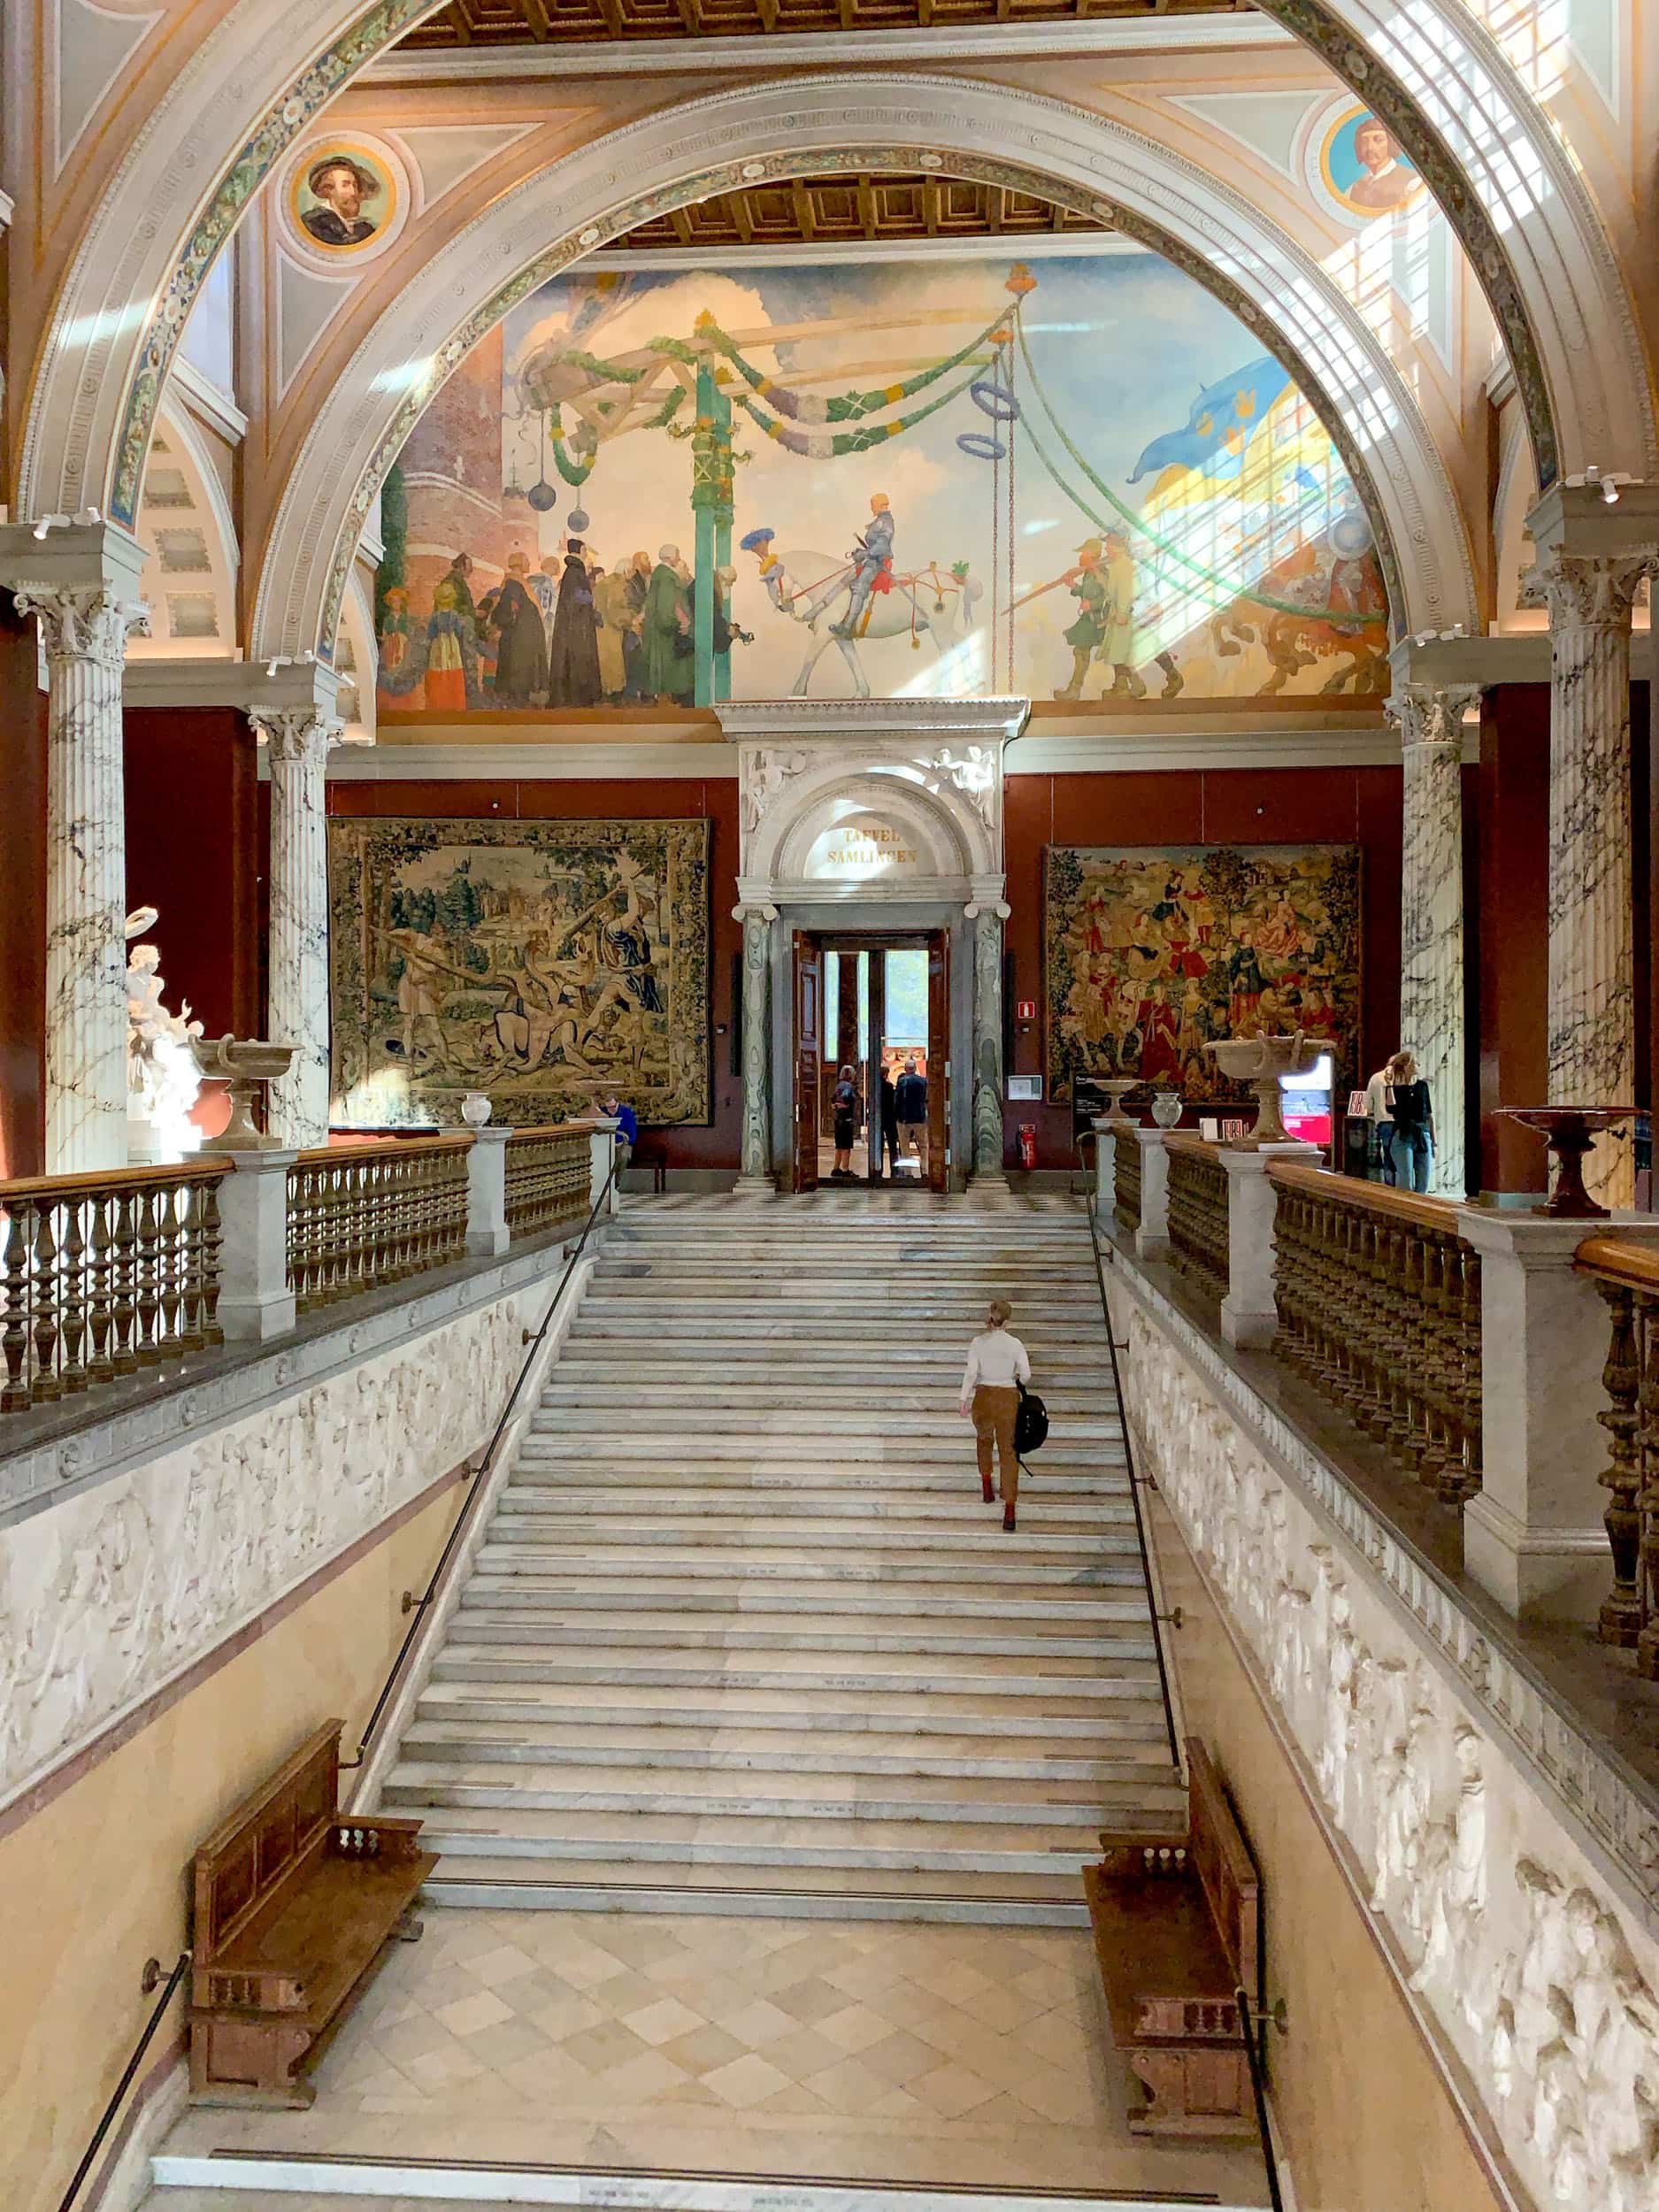 Entrance to the Nationalmuseum